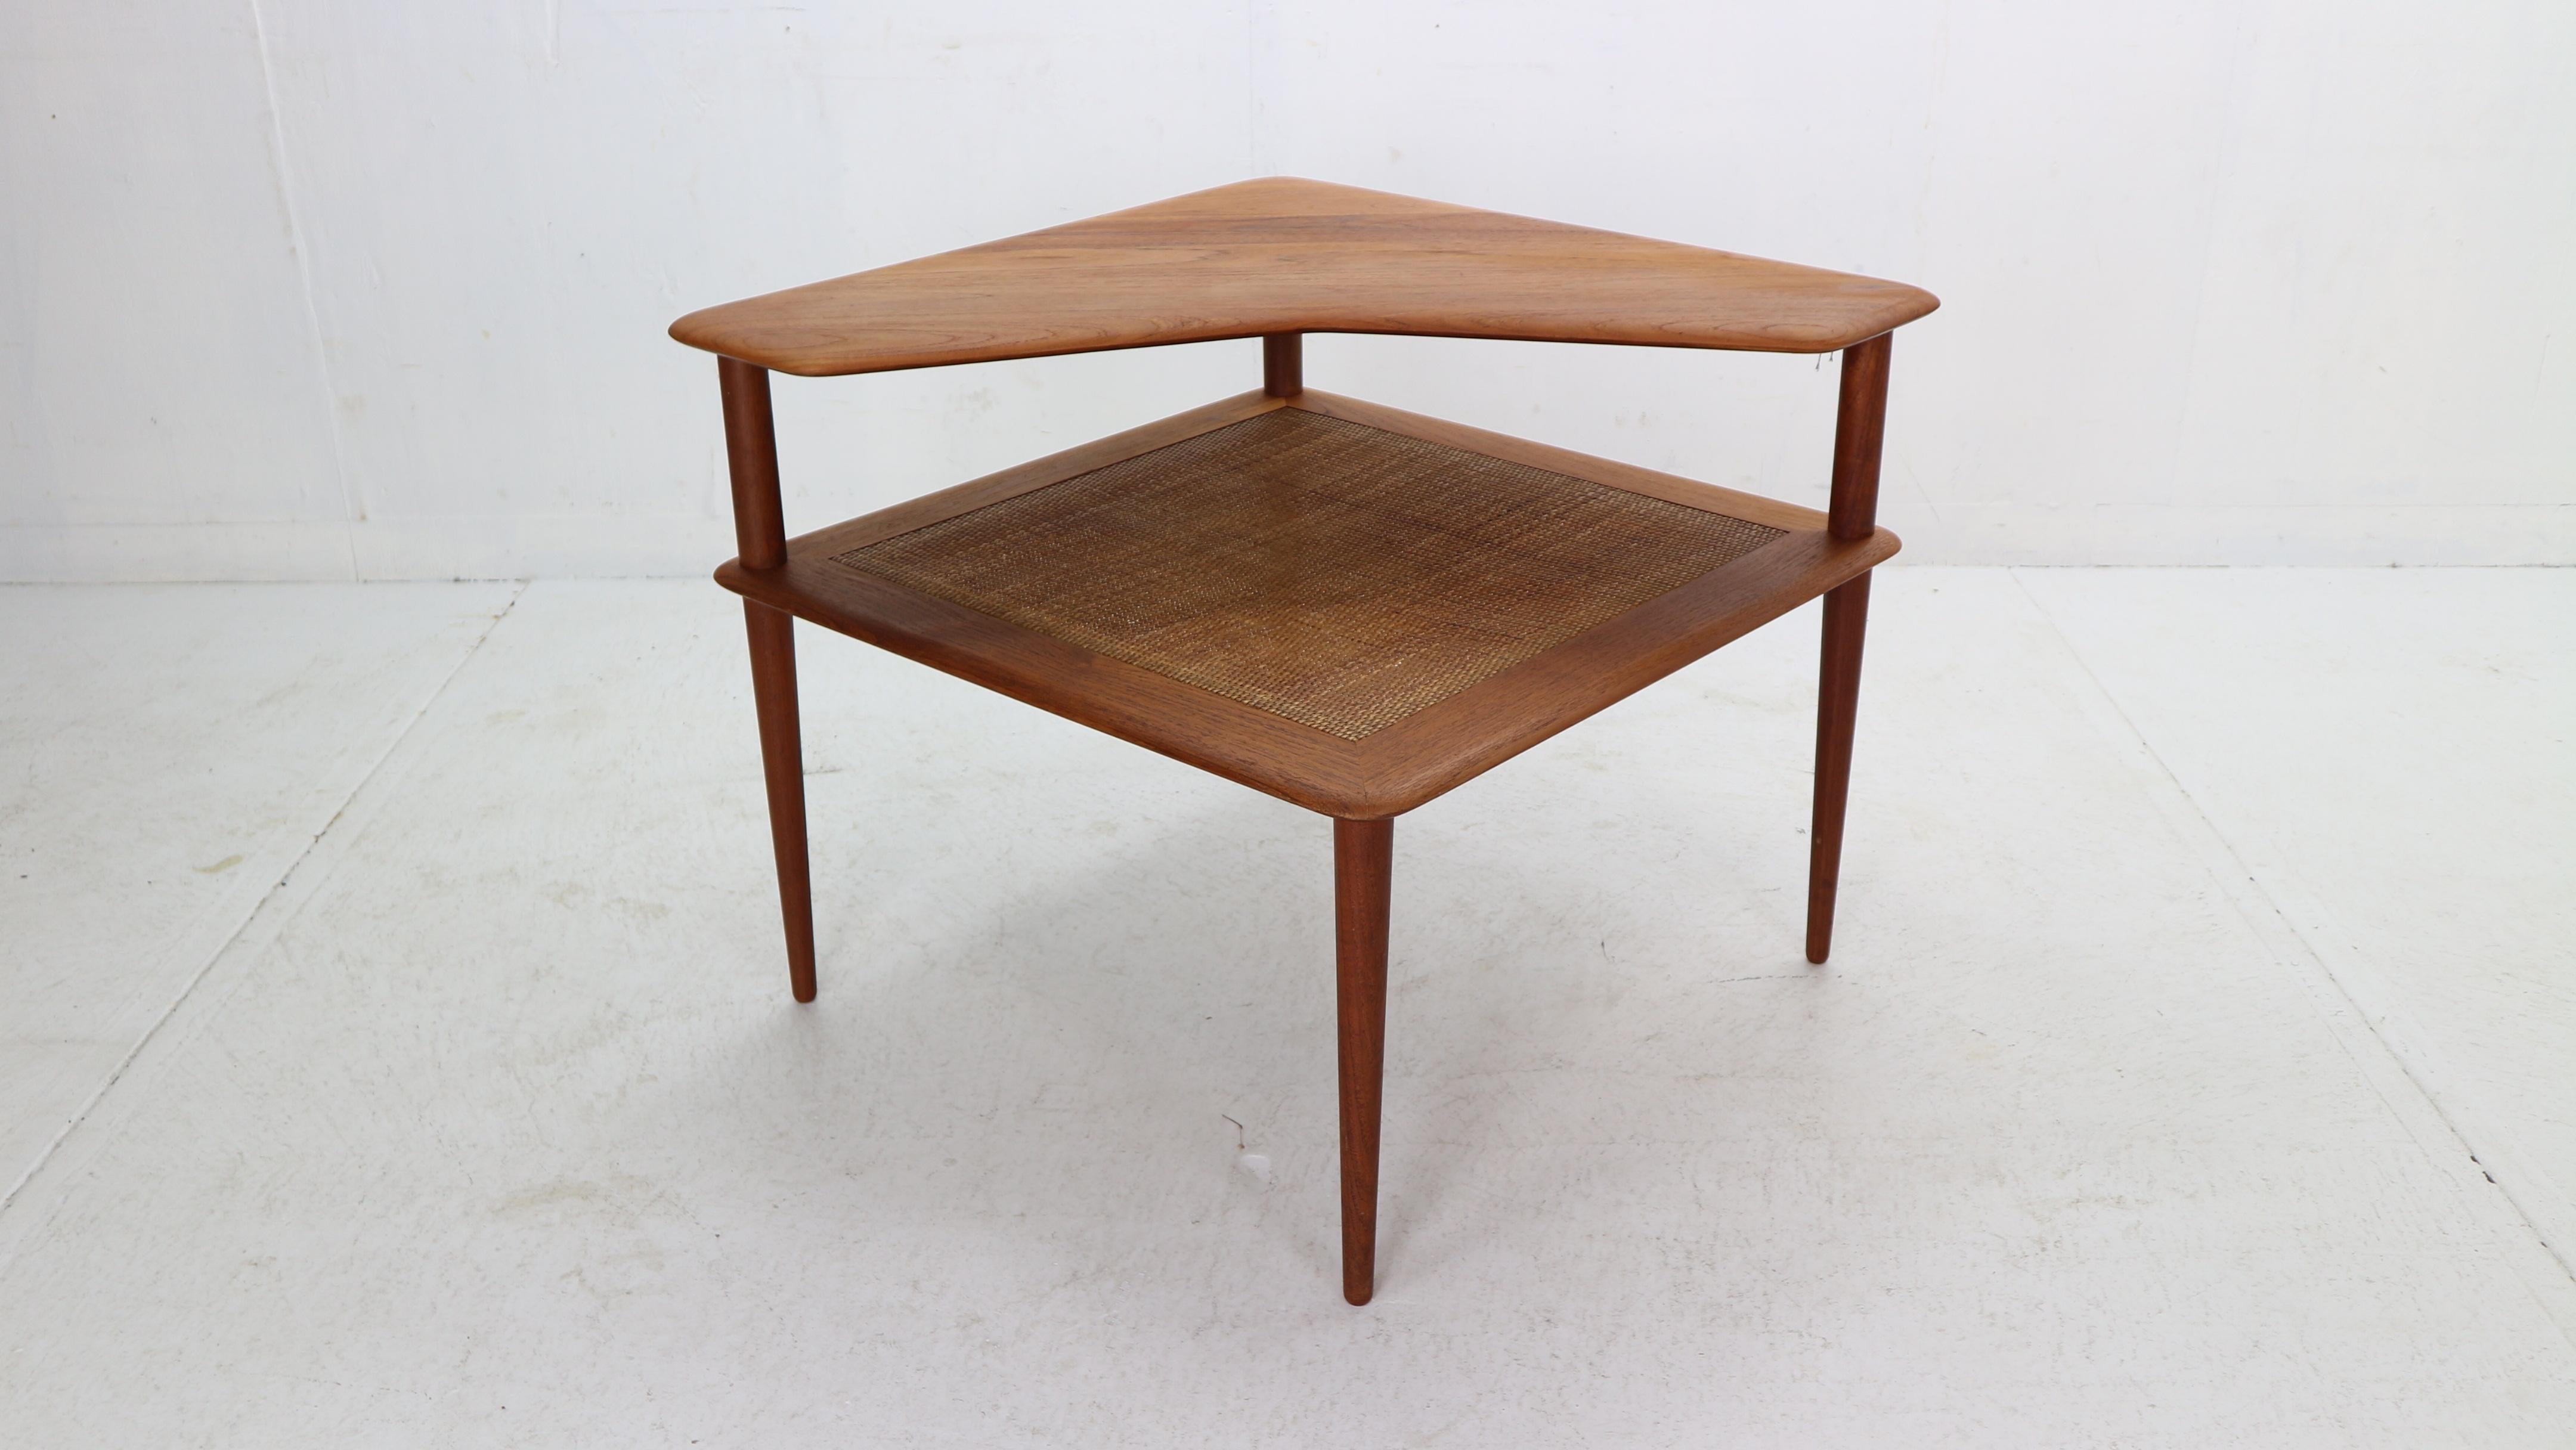 Beautiful side or corner table designed by Peter Hvidt & Orla Mølgaard-Nielsen for France & Son in 1961 Denmark. 
The table consists of two table tops, the upper one is beautifully shaped and made of solid teak, the lower one is made of closed